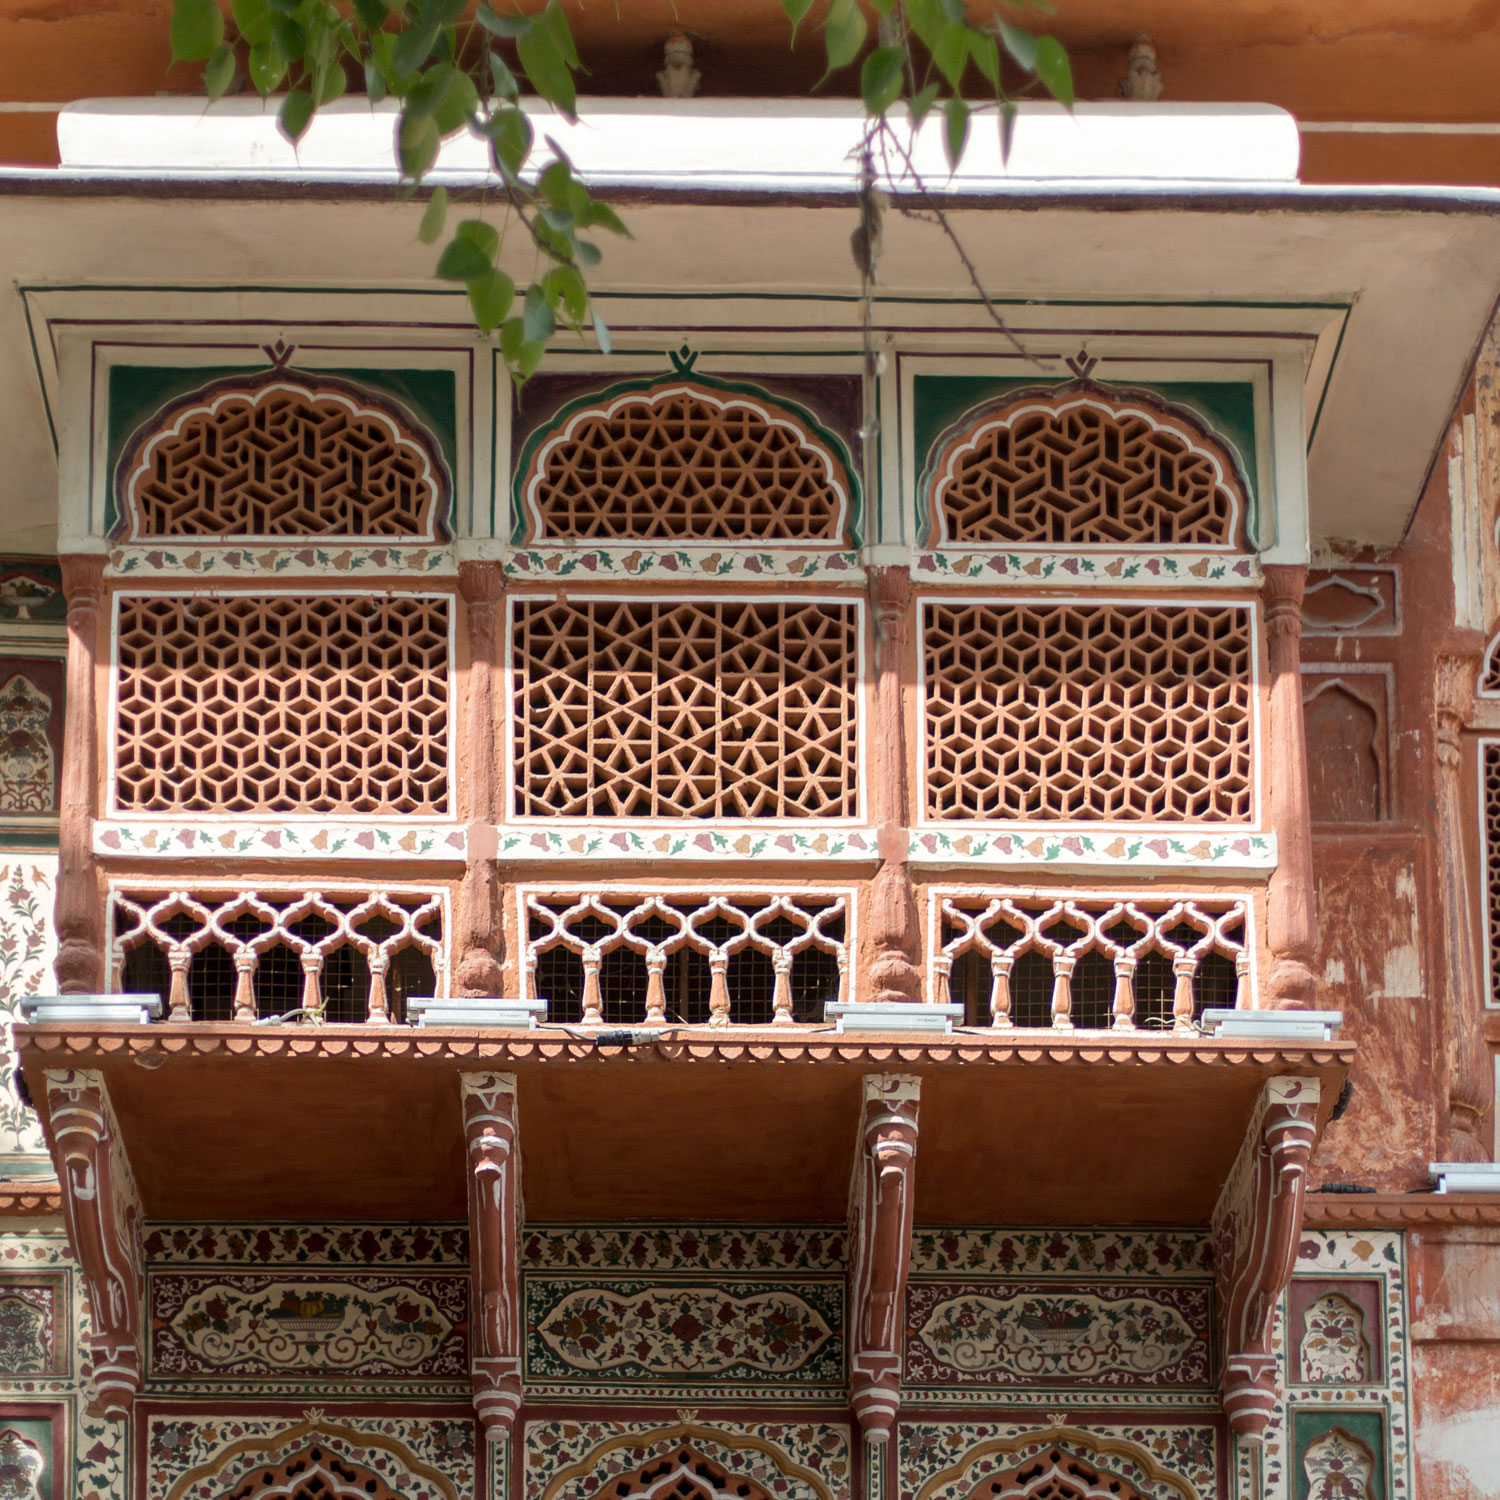 The Temples of Jaipur